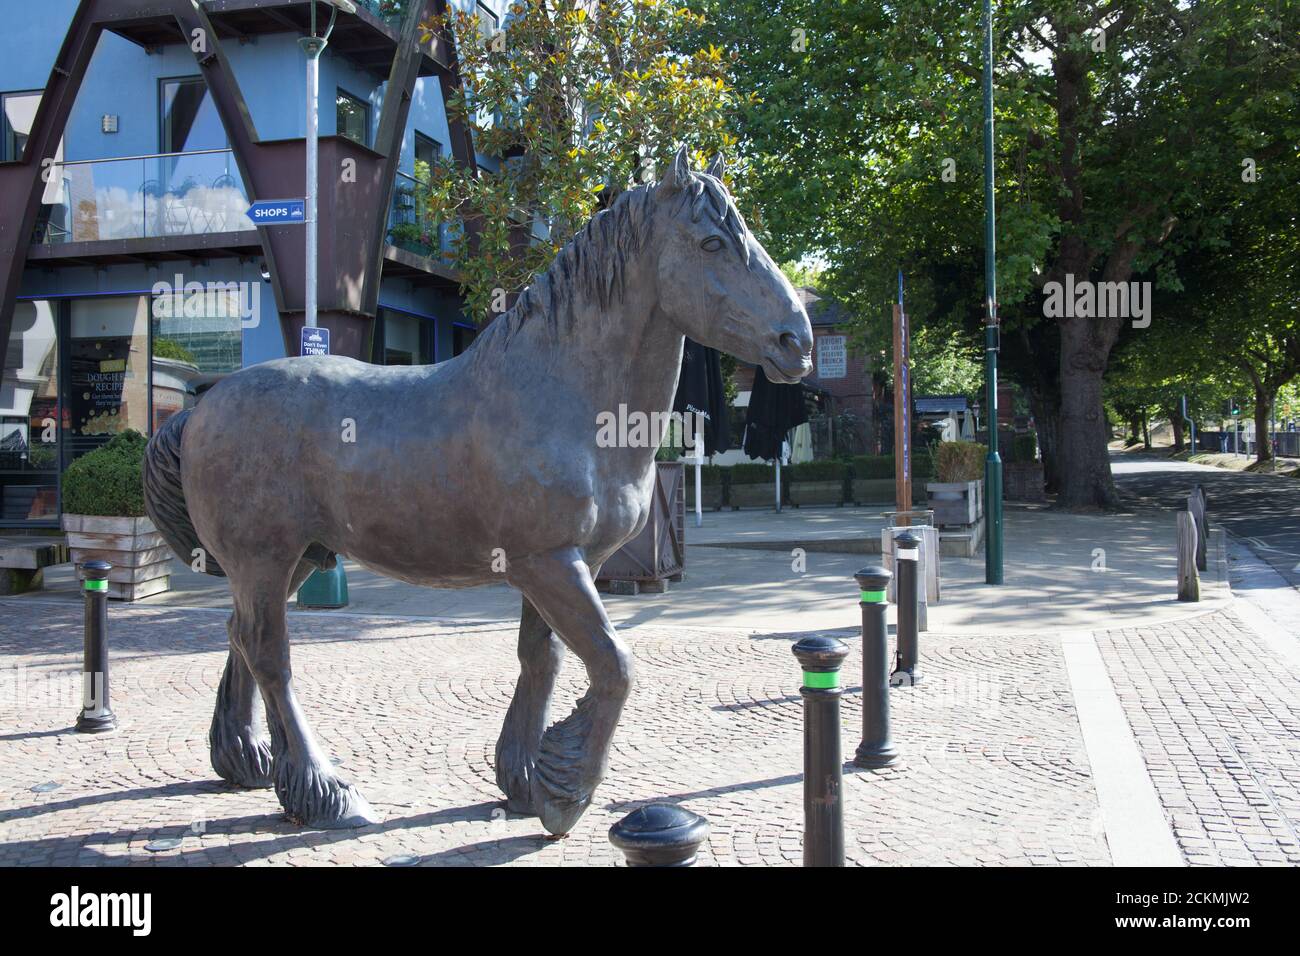 An equine statue found at Brewery Square in Dorchester by Shirley Pace in the UK. Taken on the 20th July 2020. Stock Photo